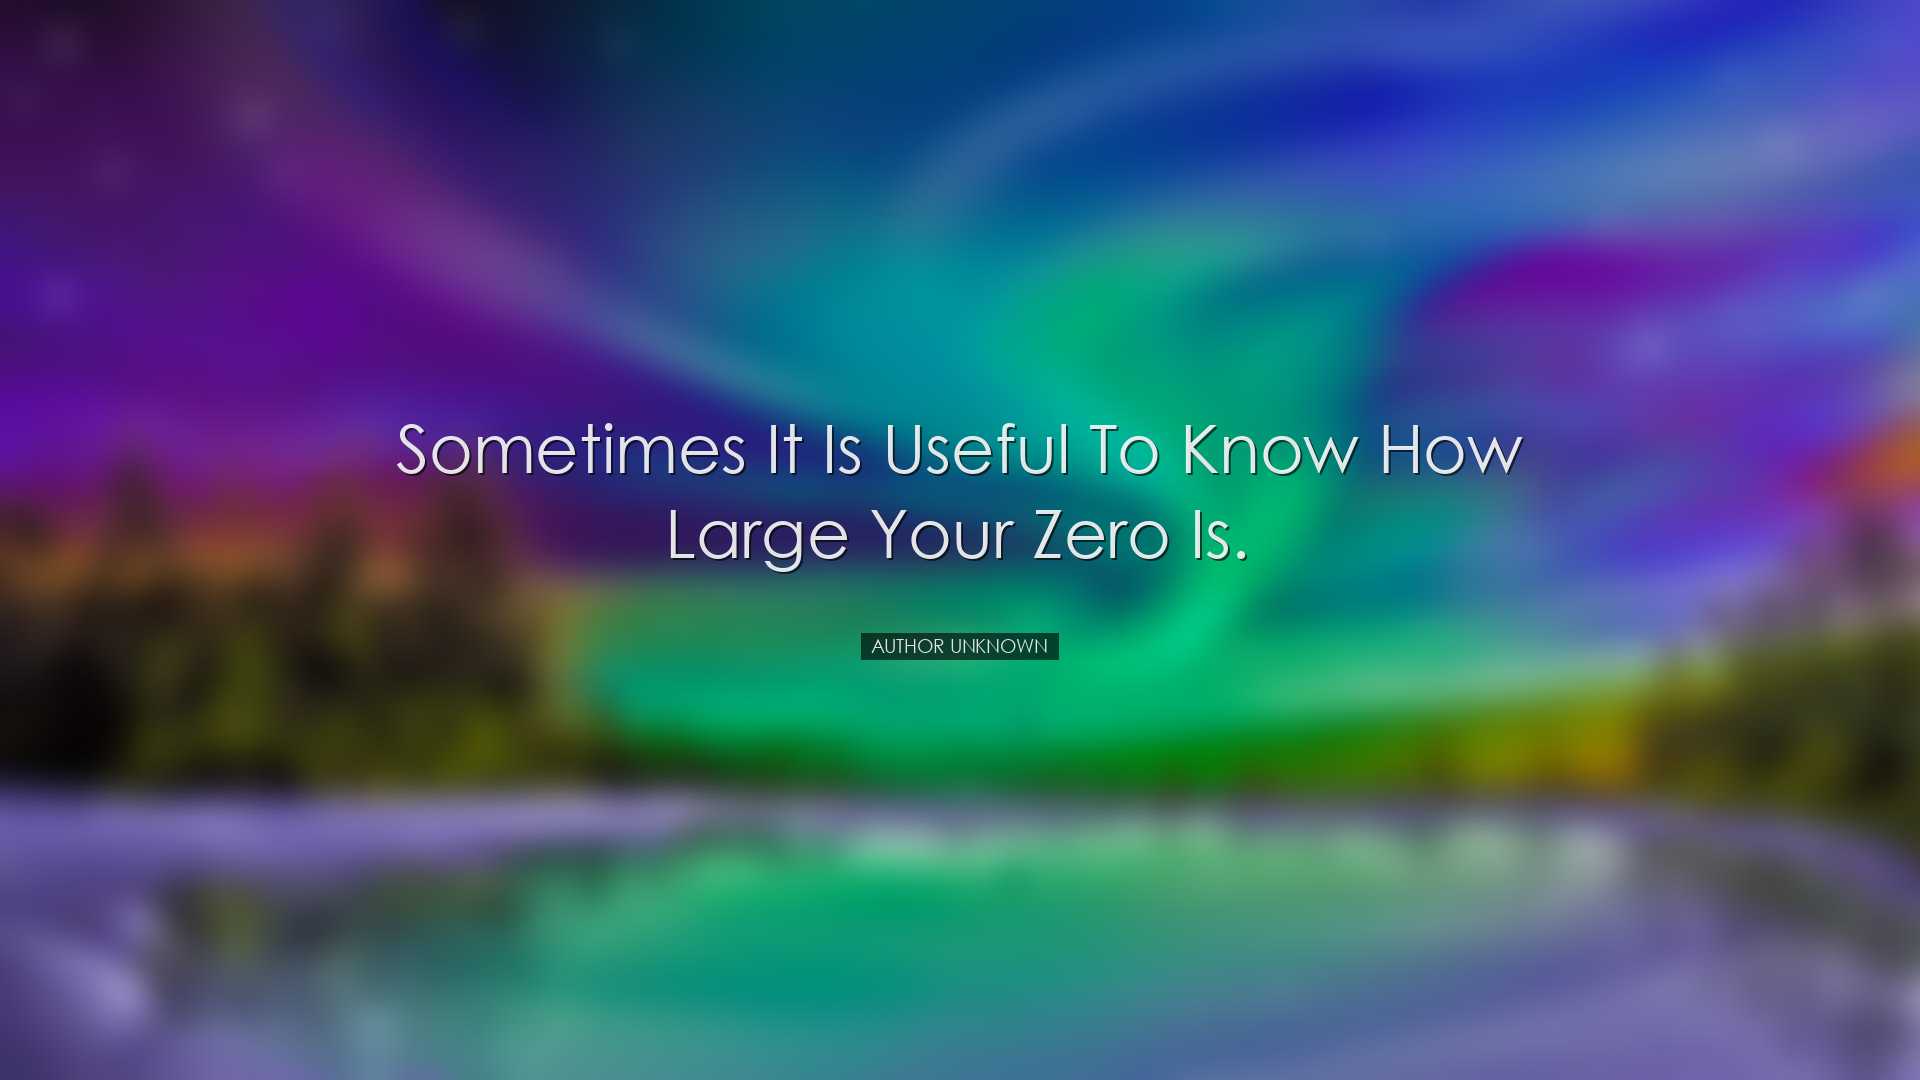 Sometimes it is useful to know how large your zero is. - Author Un